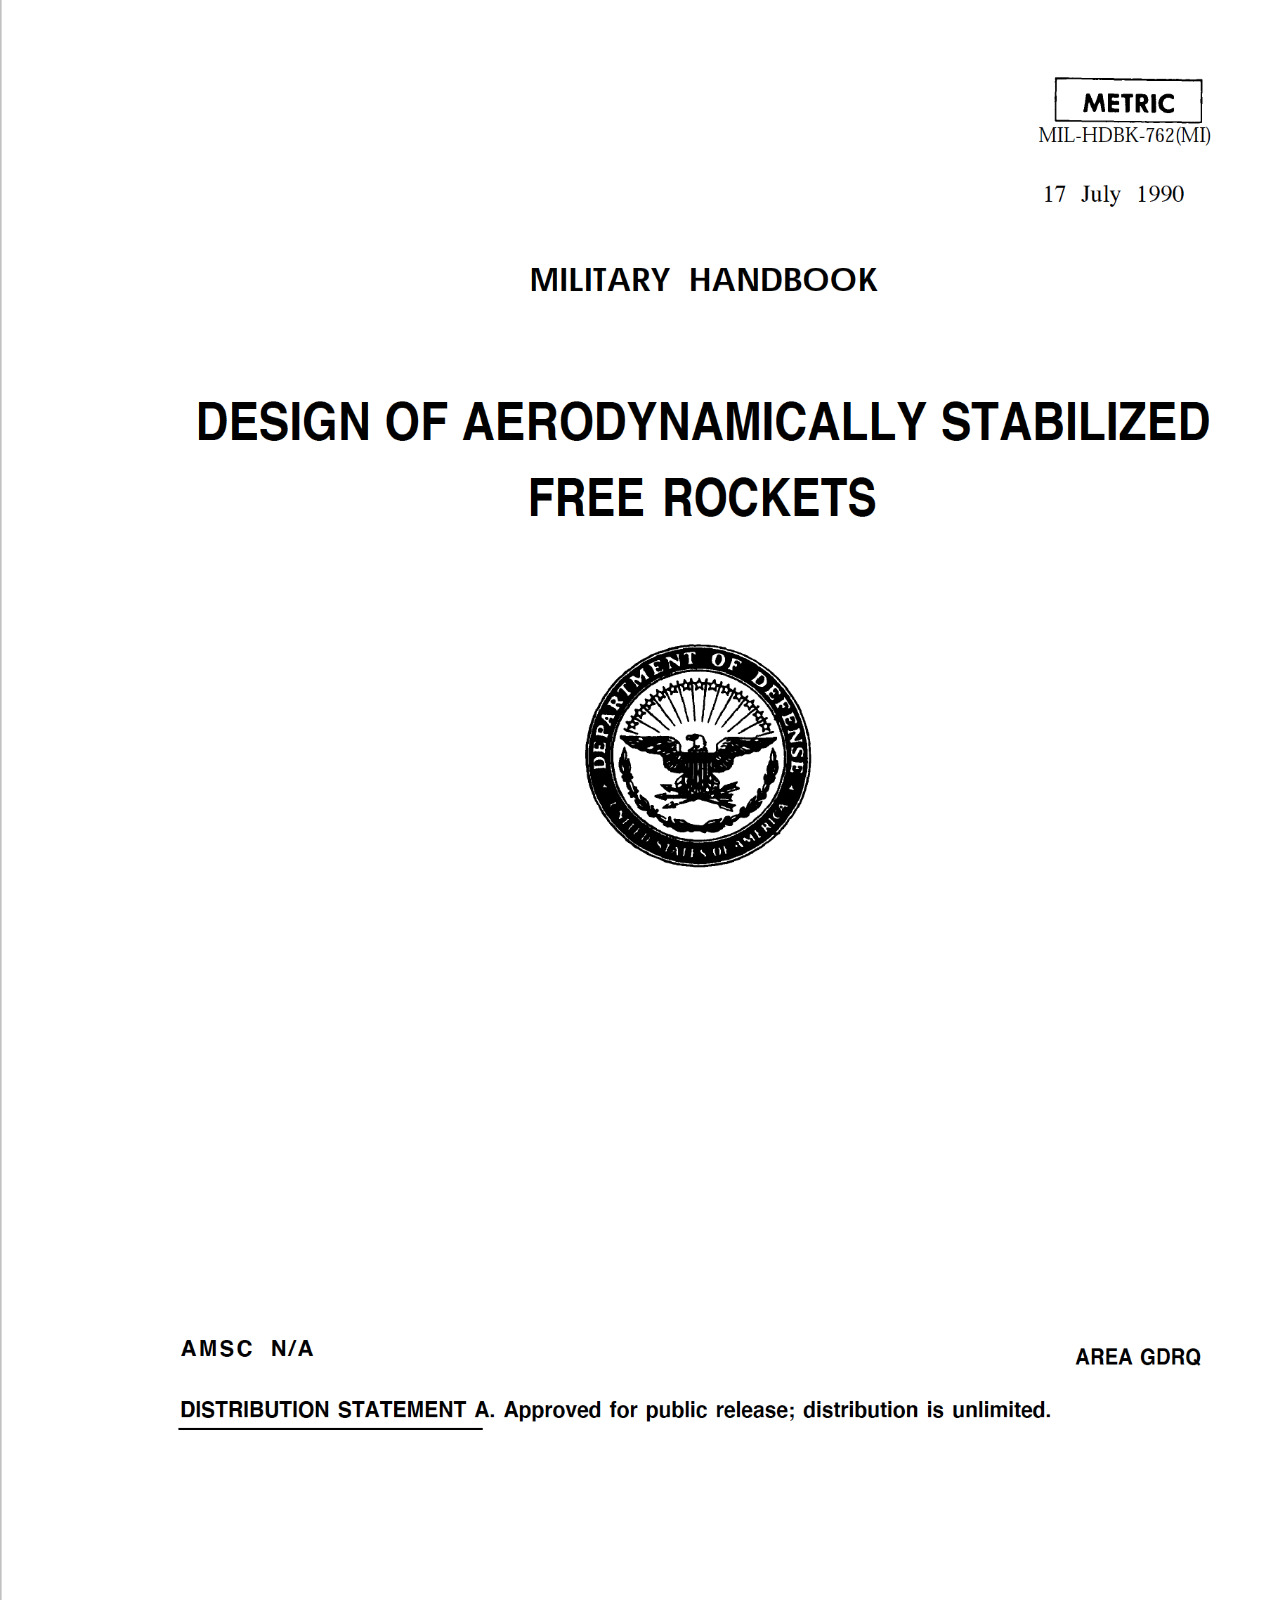 716 Page 1990 DESIGN OF AERODYNAMICALLY STABILIZED FREE ROCKETS Book on Data CD